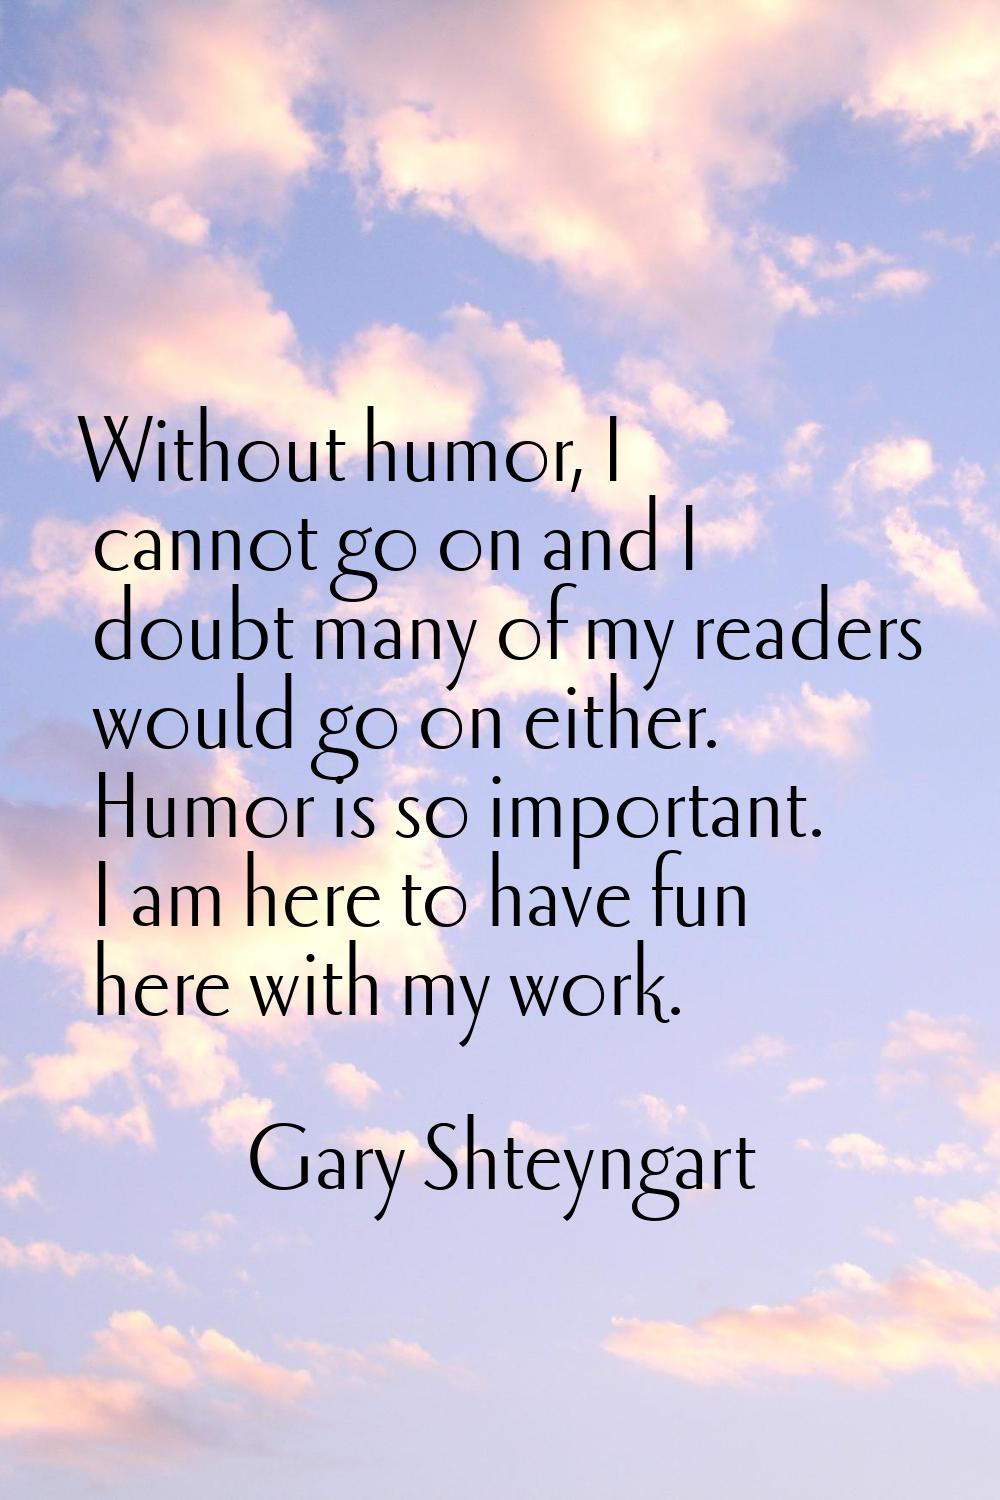 Without humor, I cannot go on and I doubt many of my readers would go on either. Humor is so import